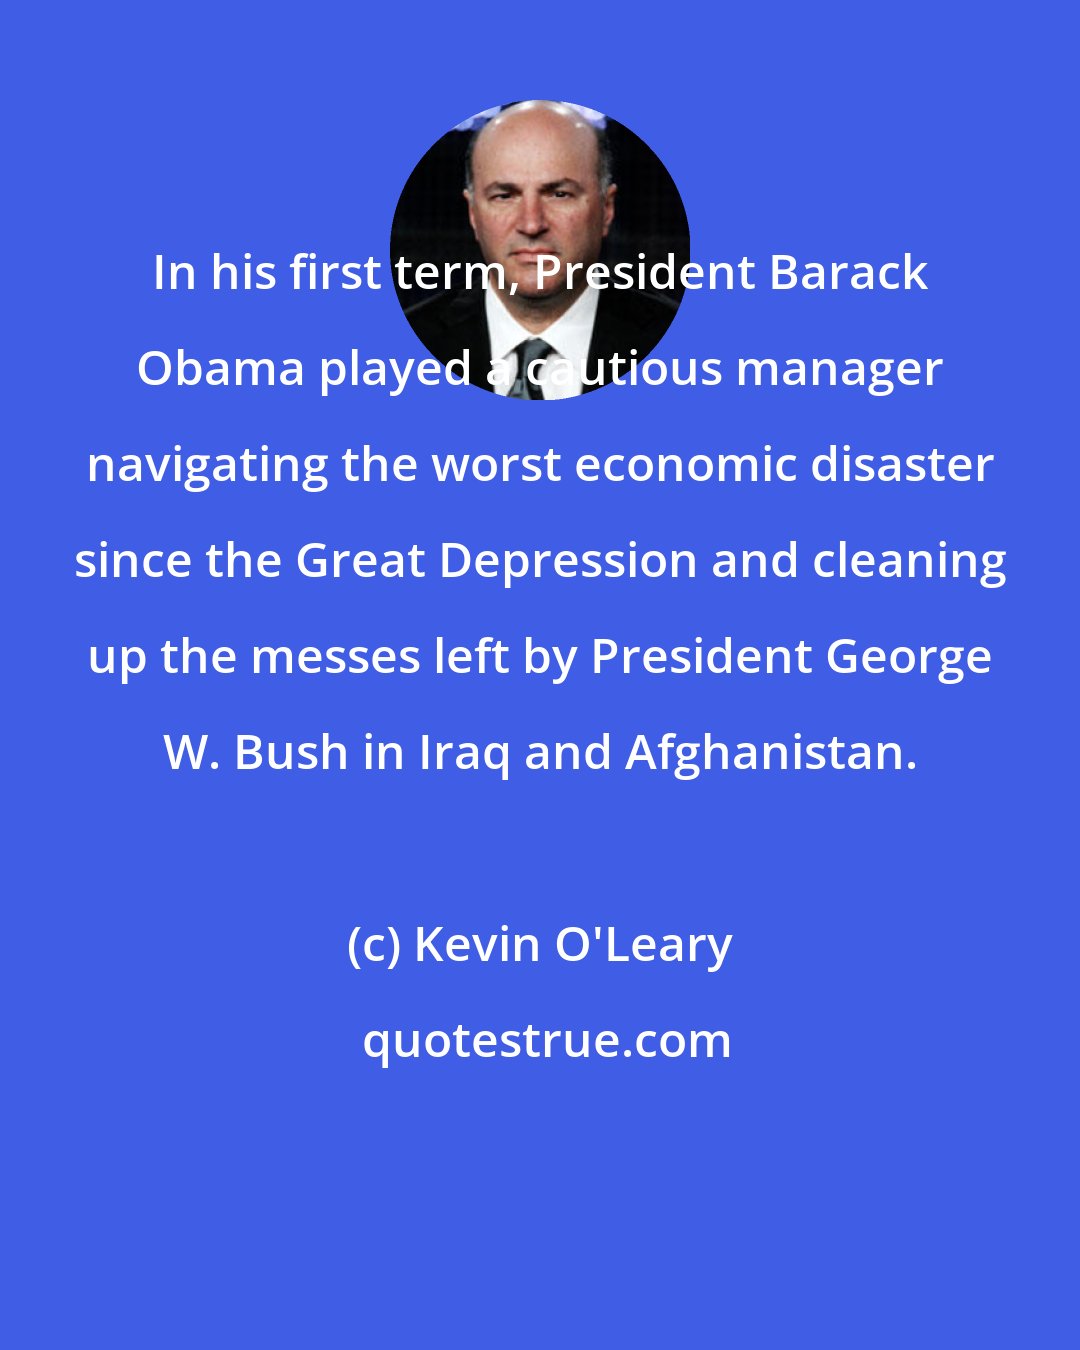 Kevin O'Leary: In his first term, President Barack Obama played a cautious manager navigating the worst economic disaster since the Great Depression and cleaning up the messes left by President George W. Bush in Iraq and Afghanistan.